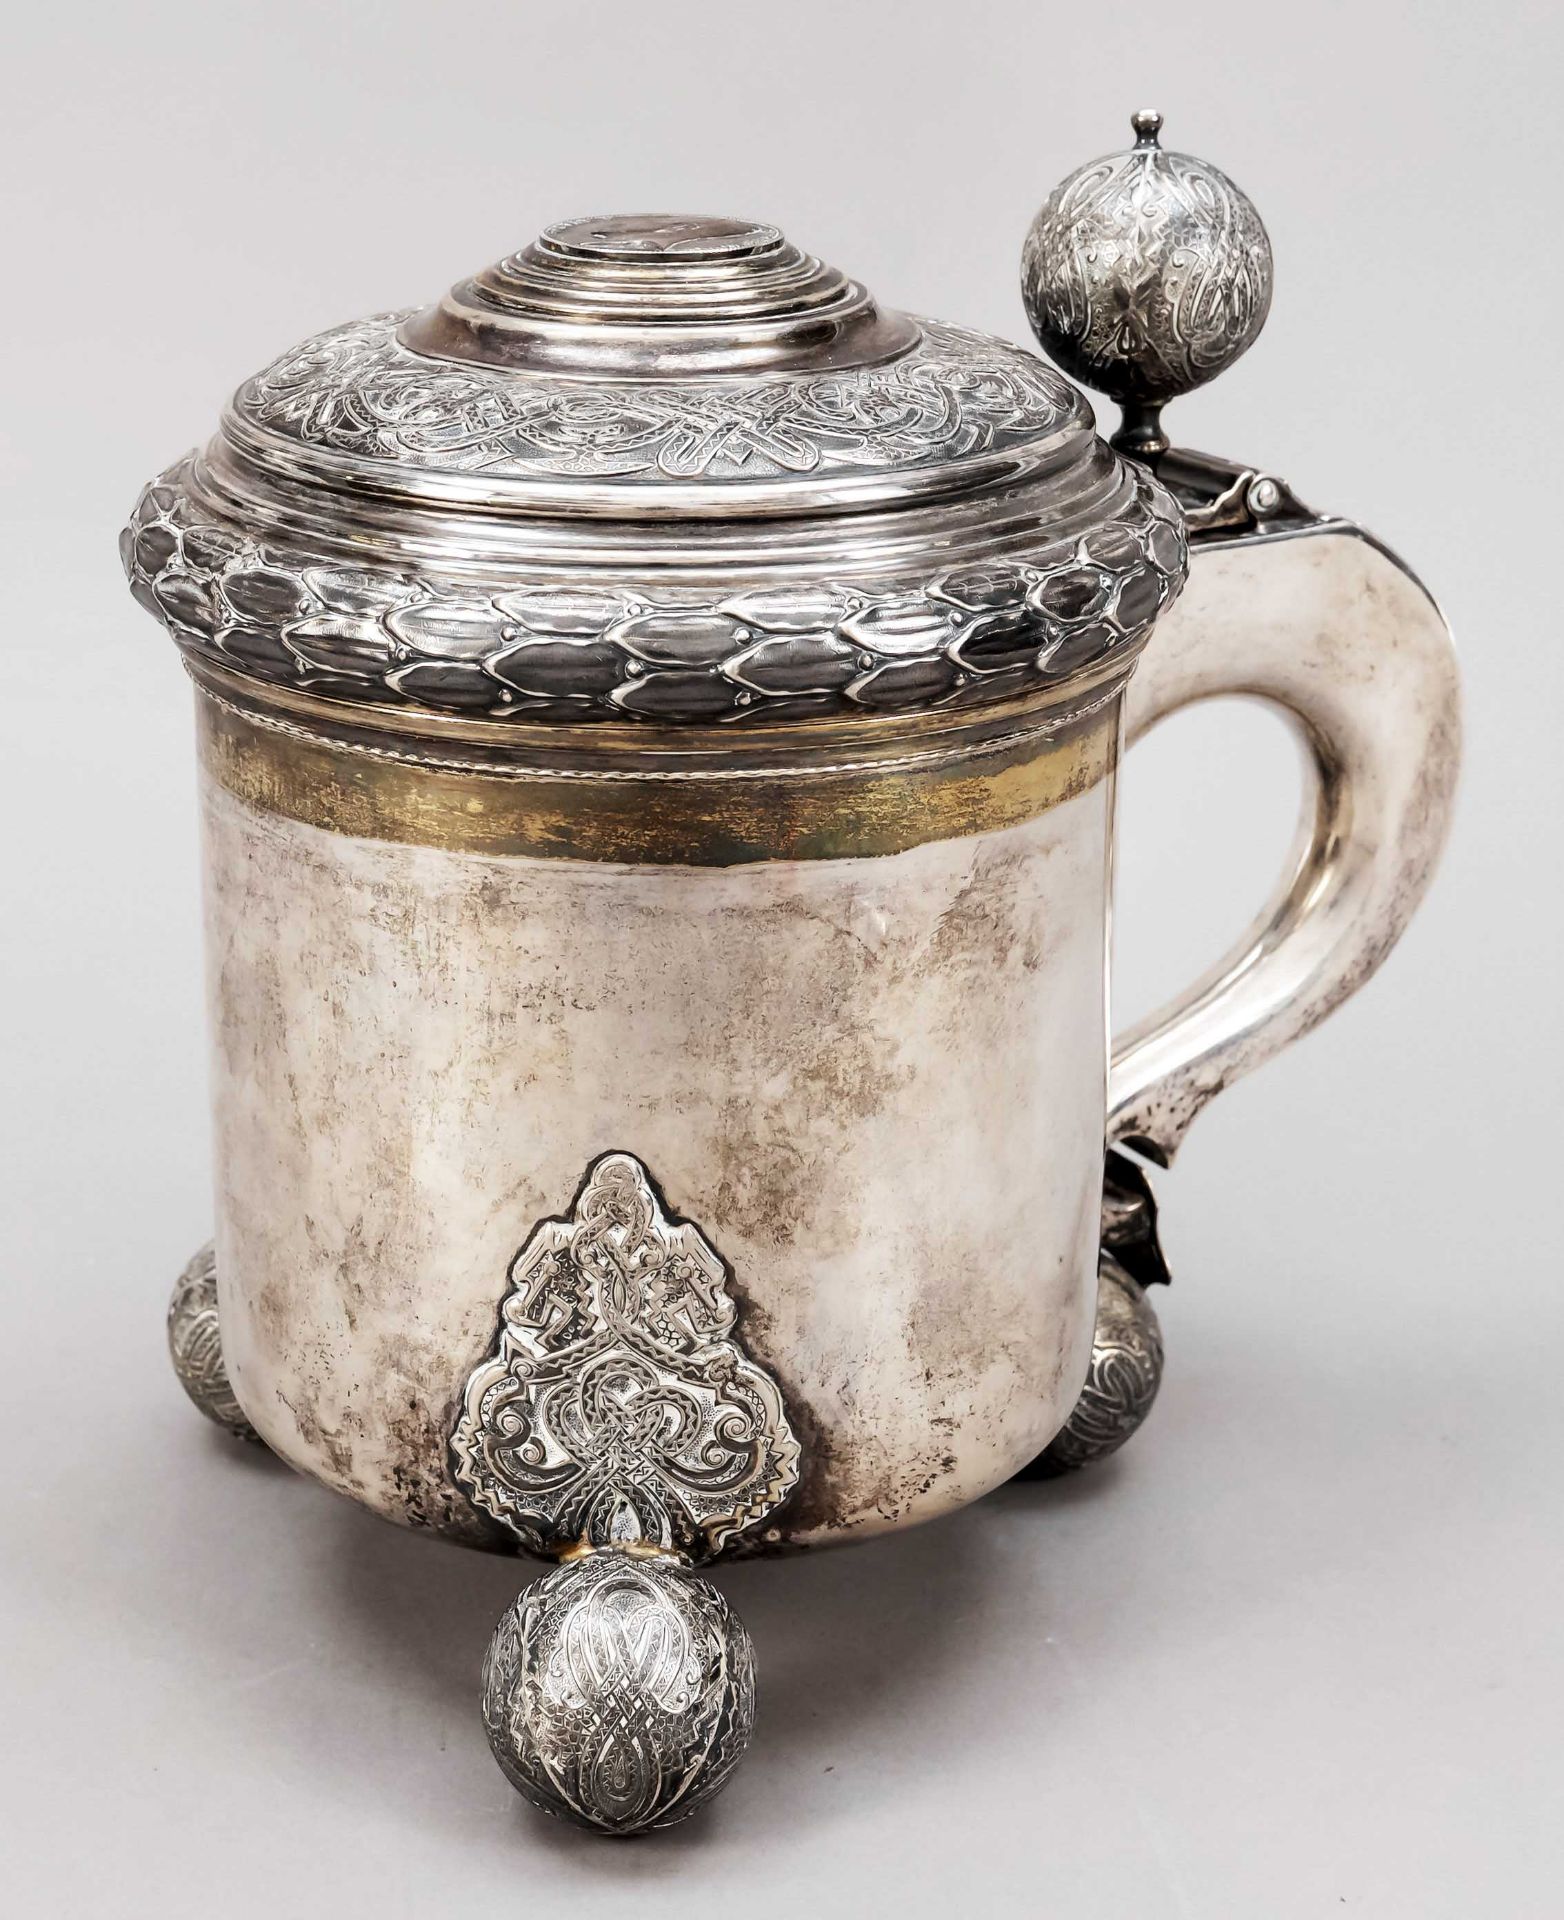 Large tankard, Sweden, 1945, maker's mark CGH, silver 830/000, gilt interior, on 3 decorated ball